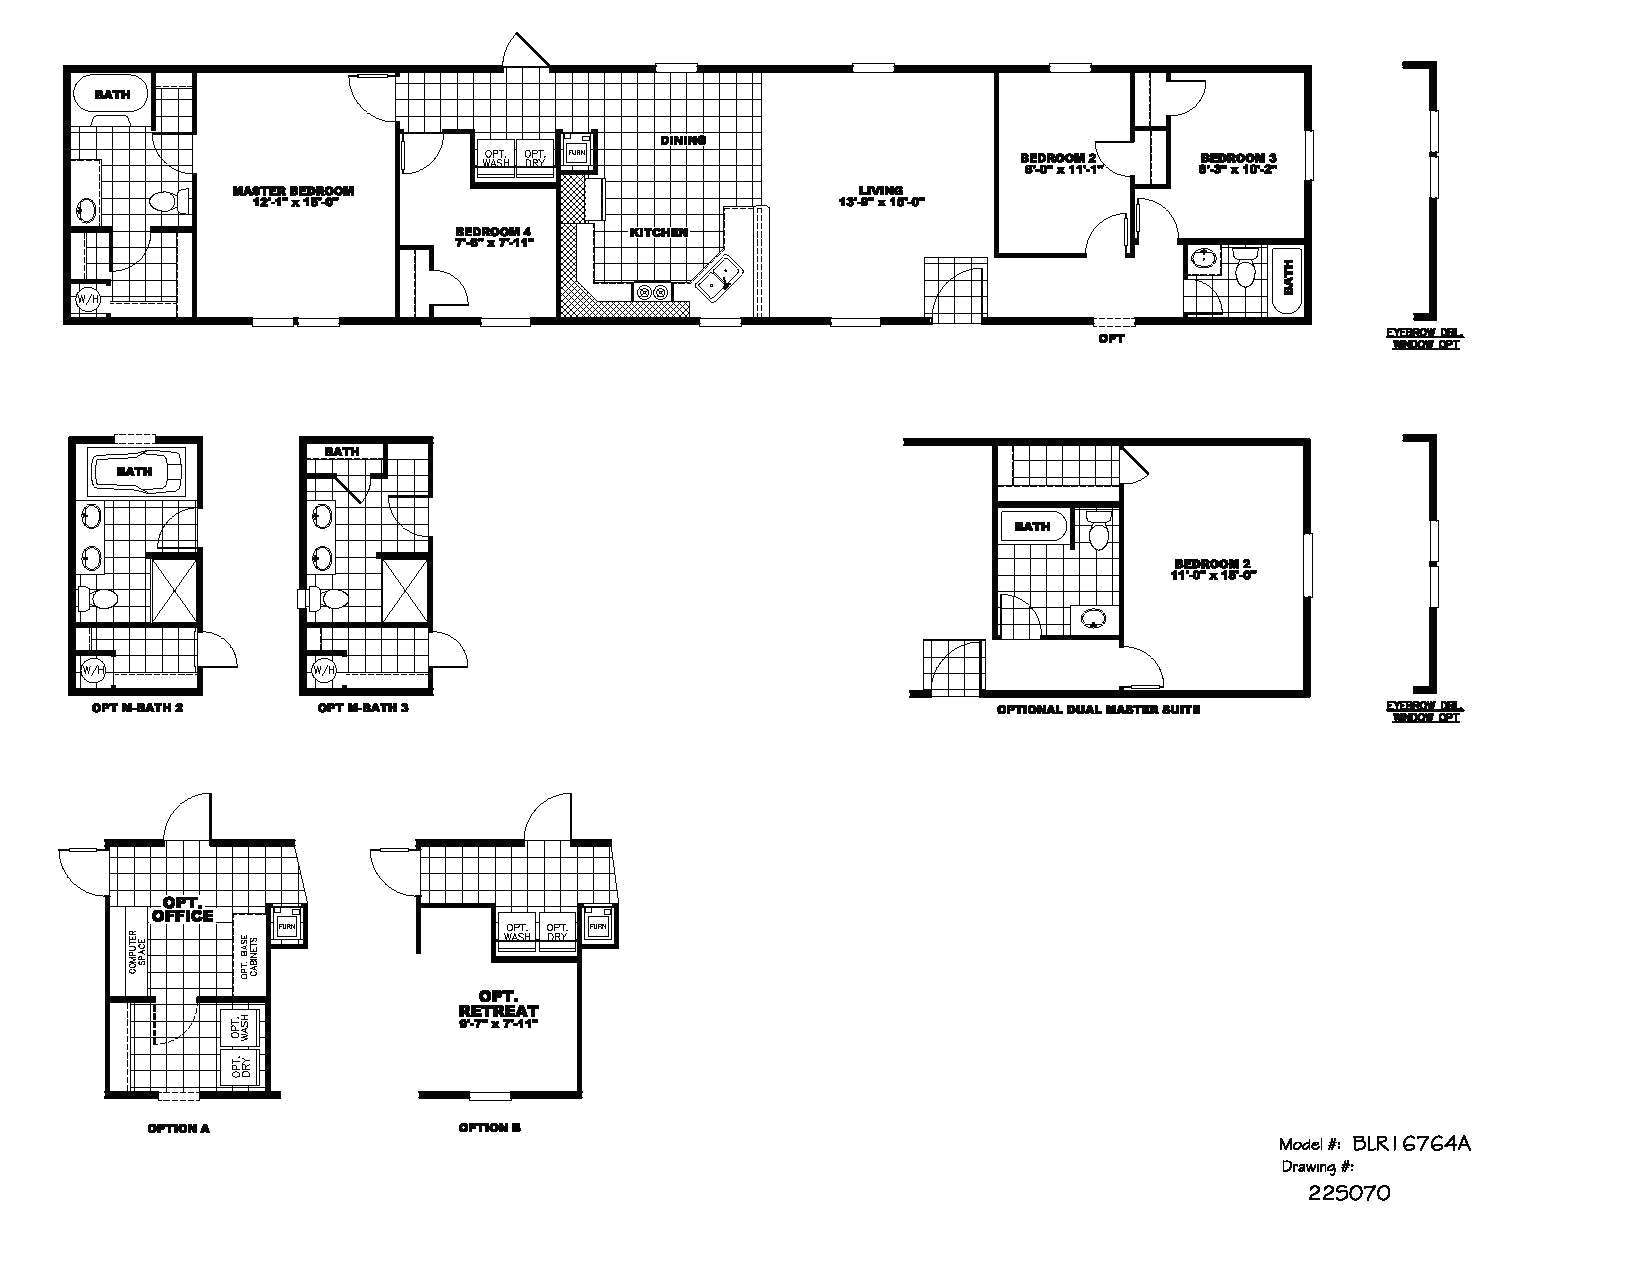 mobile home steps plans luxury mobil home plans best mobile home steps plans elegant lumbec 0d